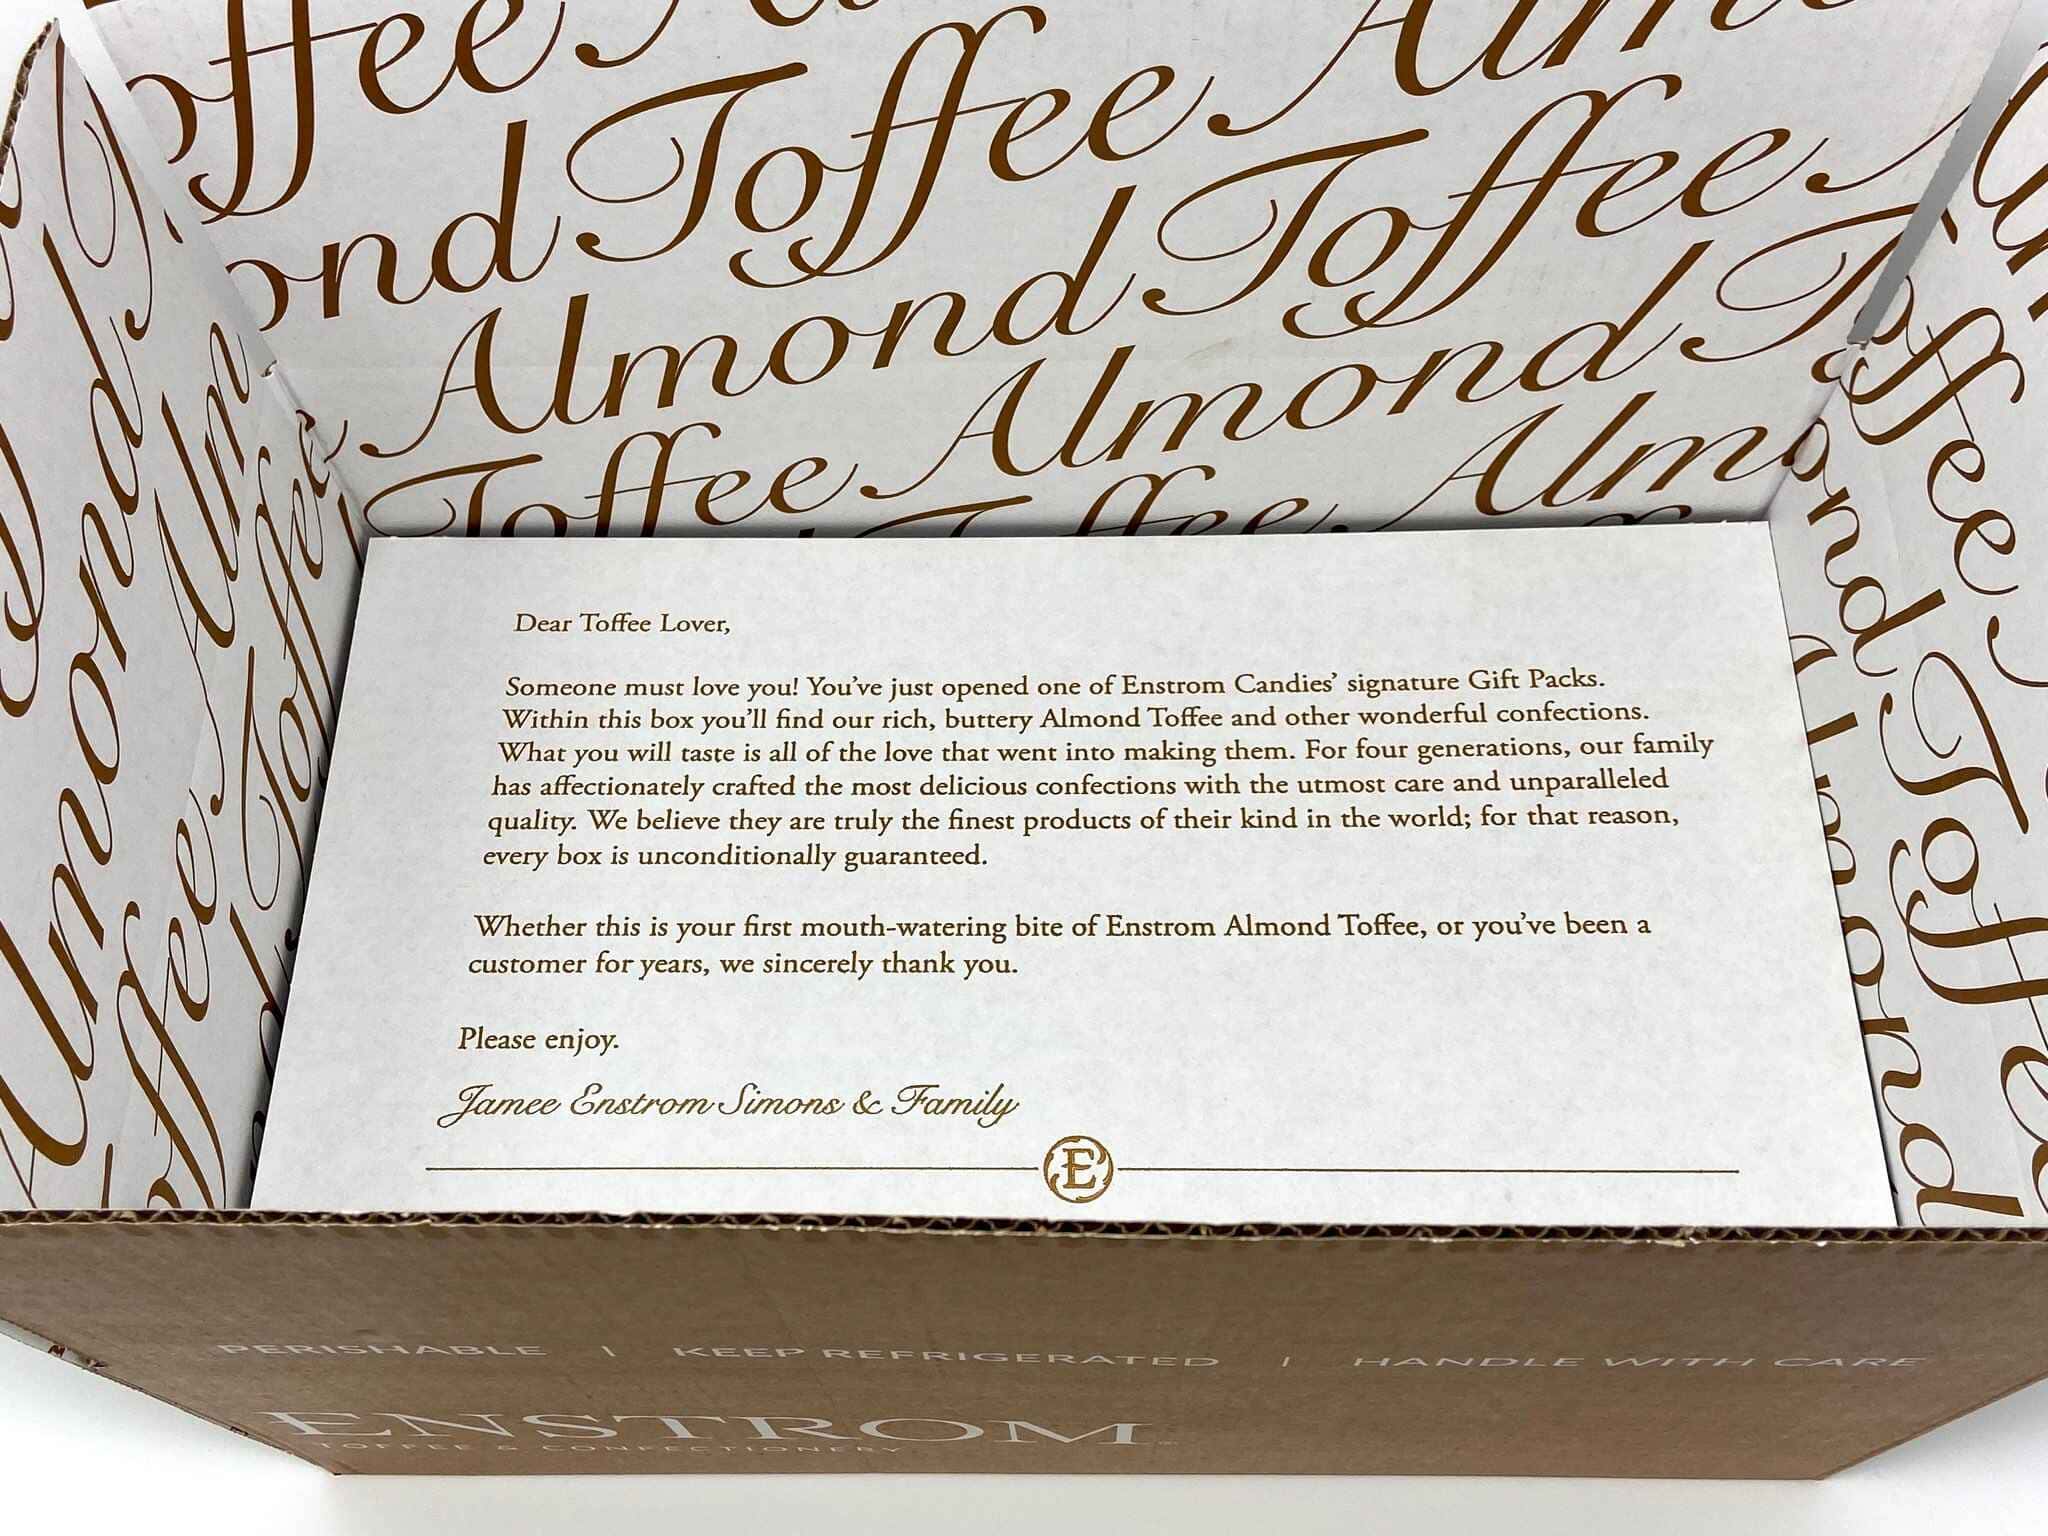 A box with a letter inside of it.